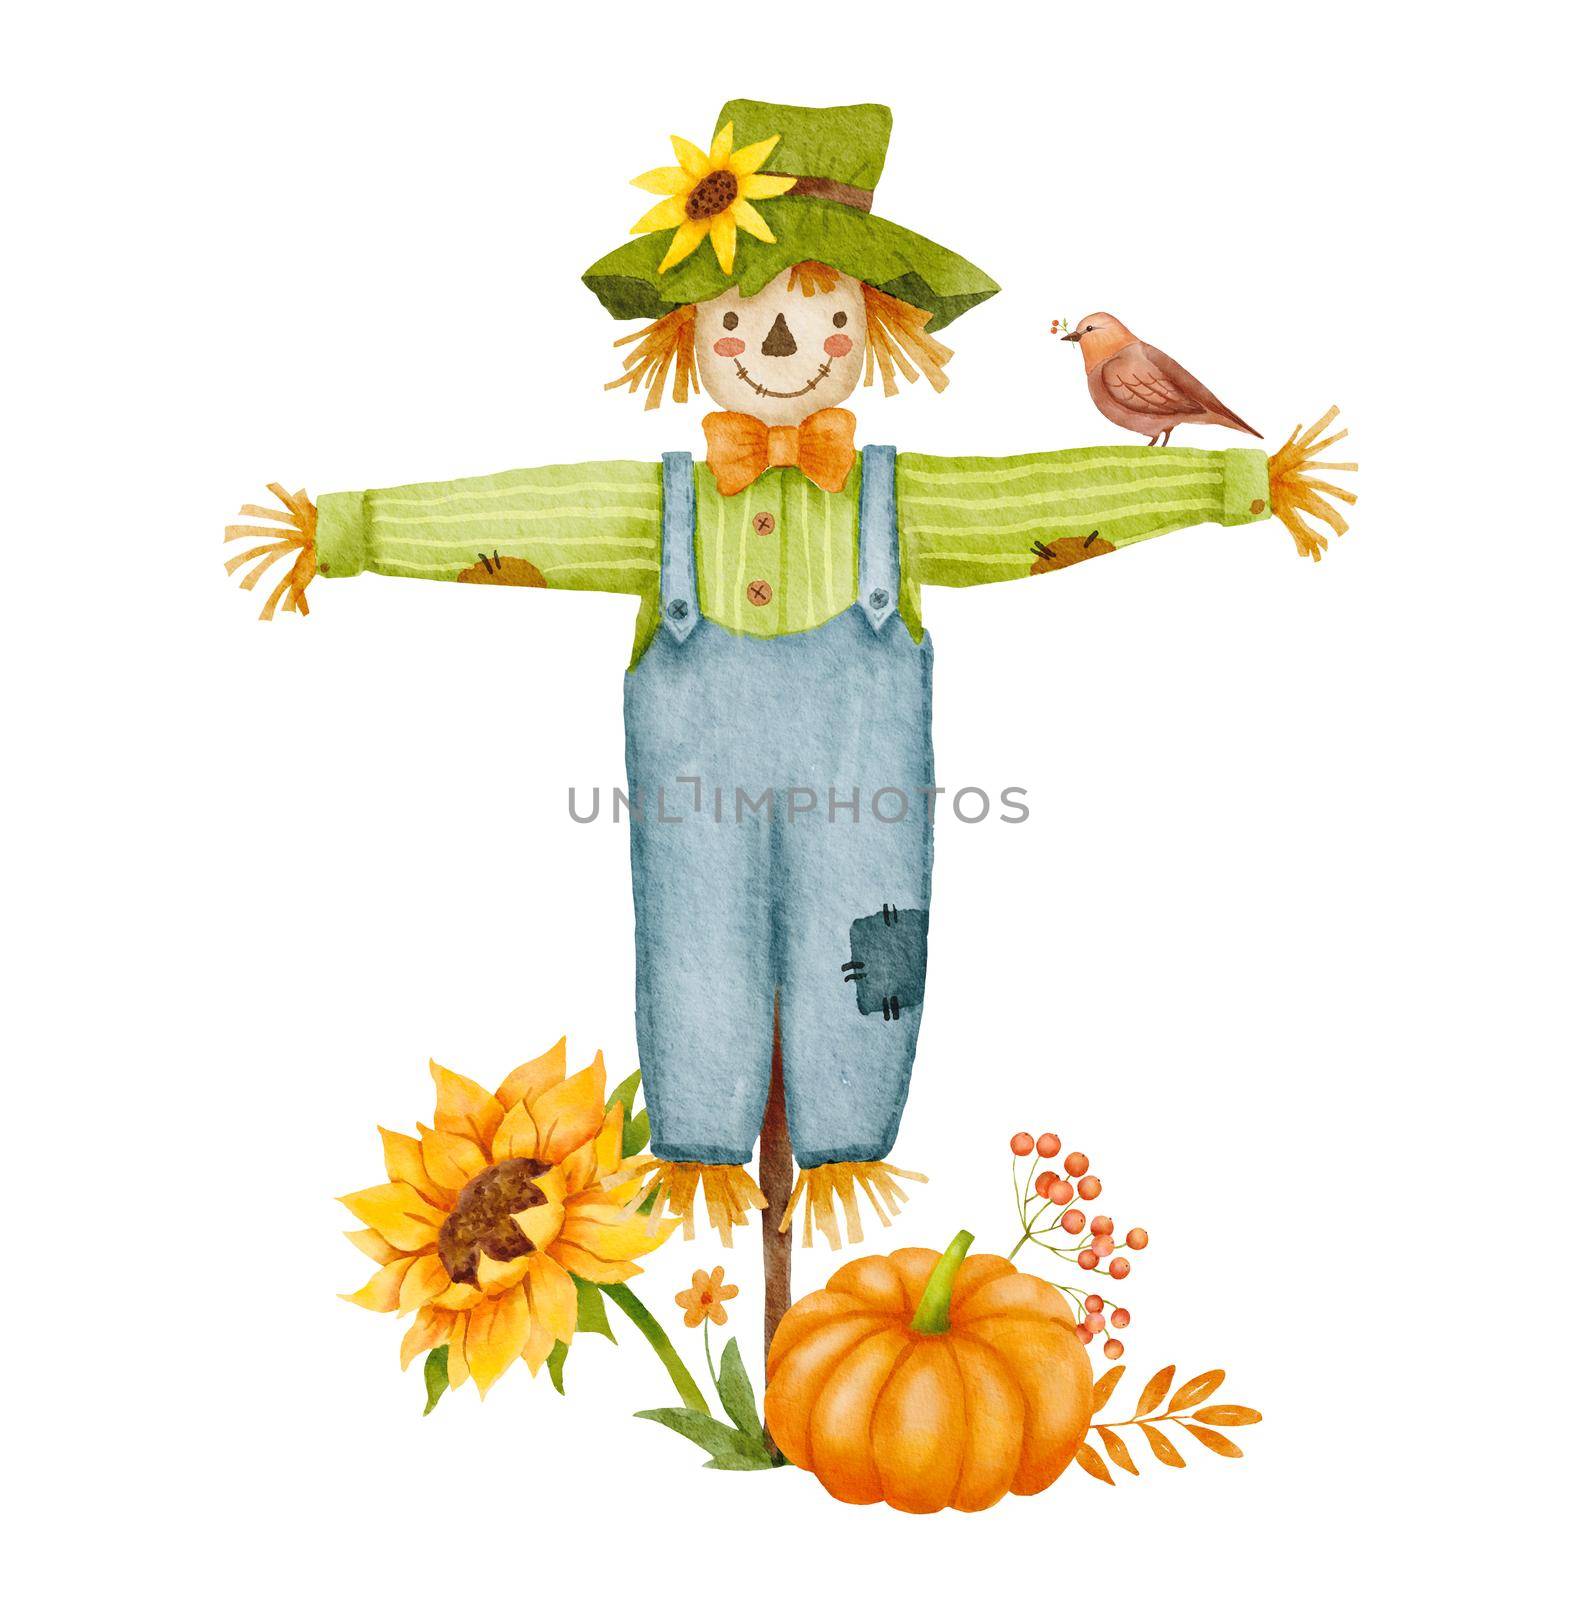 Watercolor scarecrow character with bird, sunflower and pumpkin isolated on white background. Autumn decor. Fall composition by ElenaPlatova